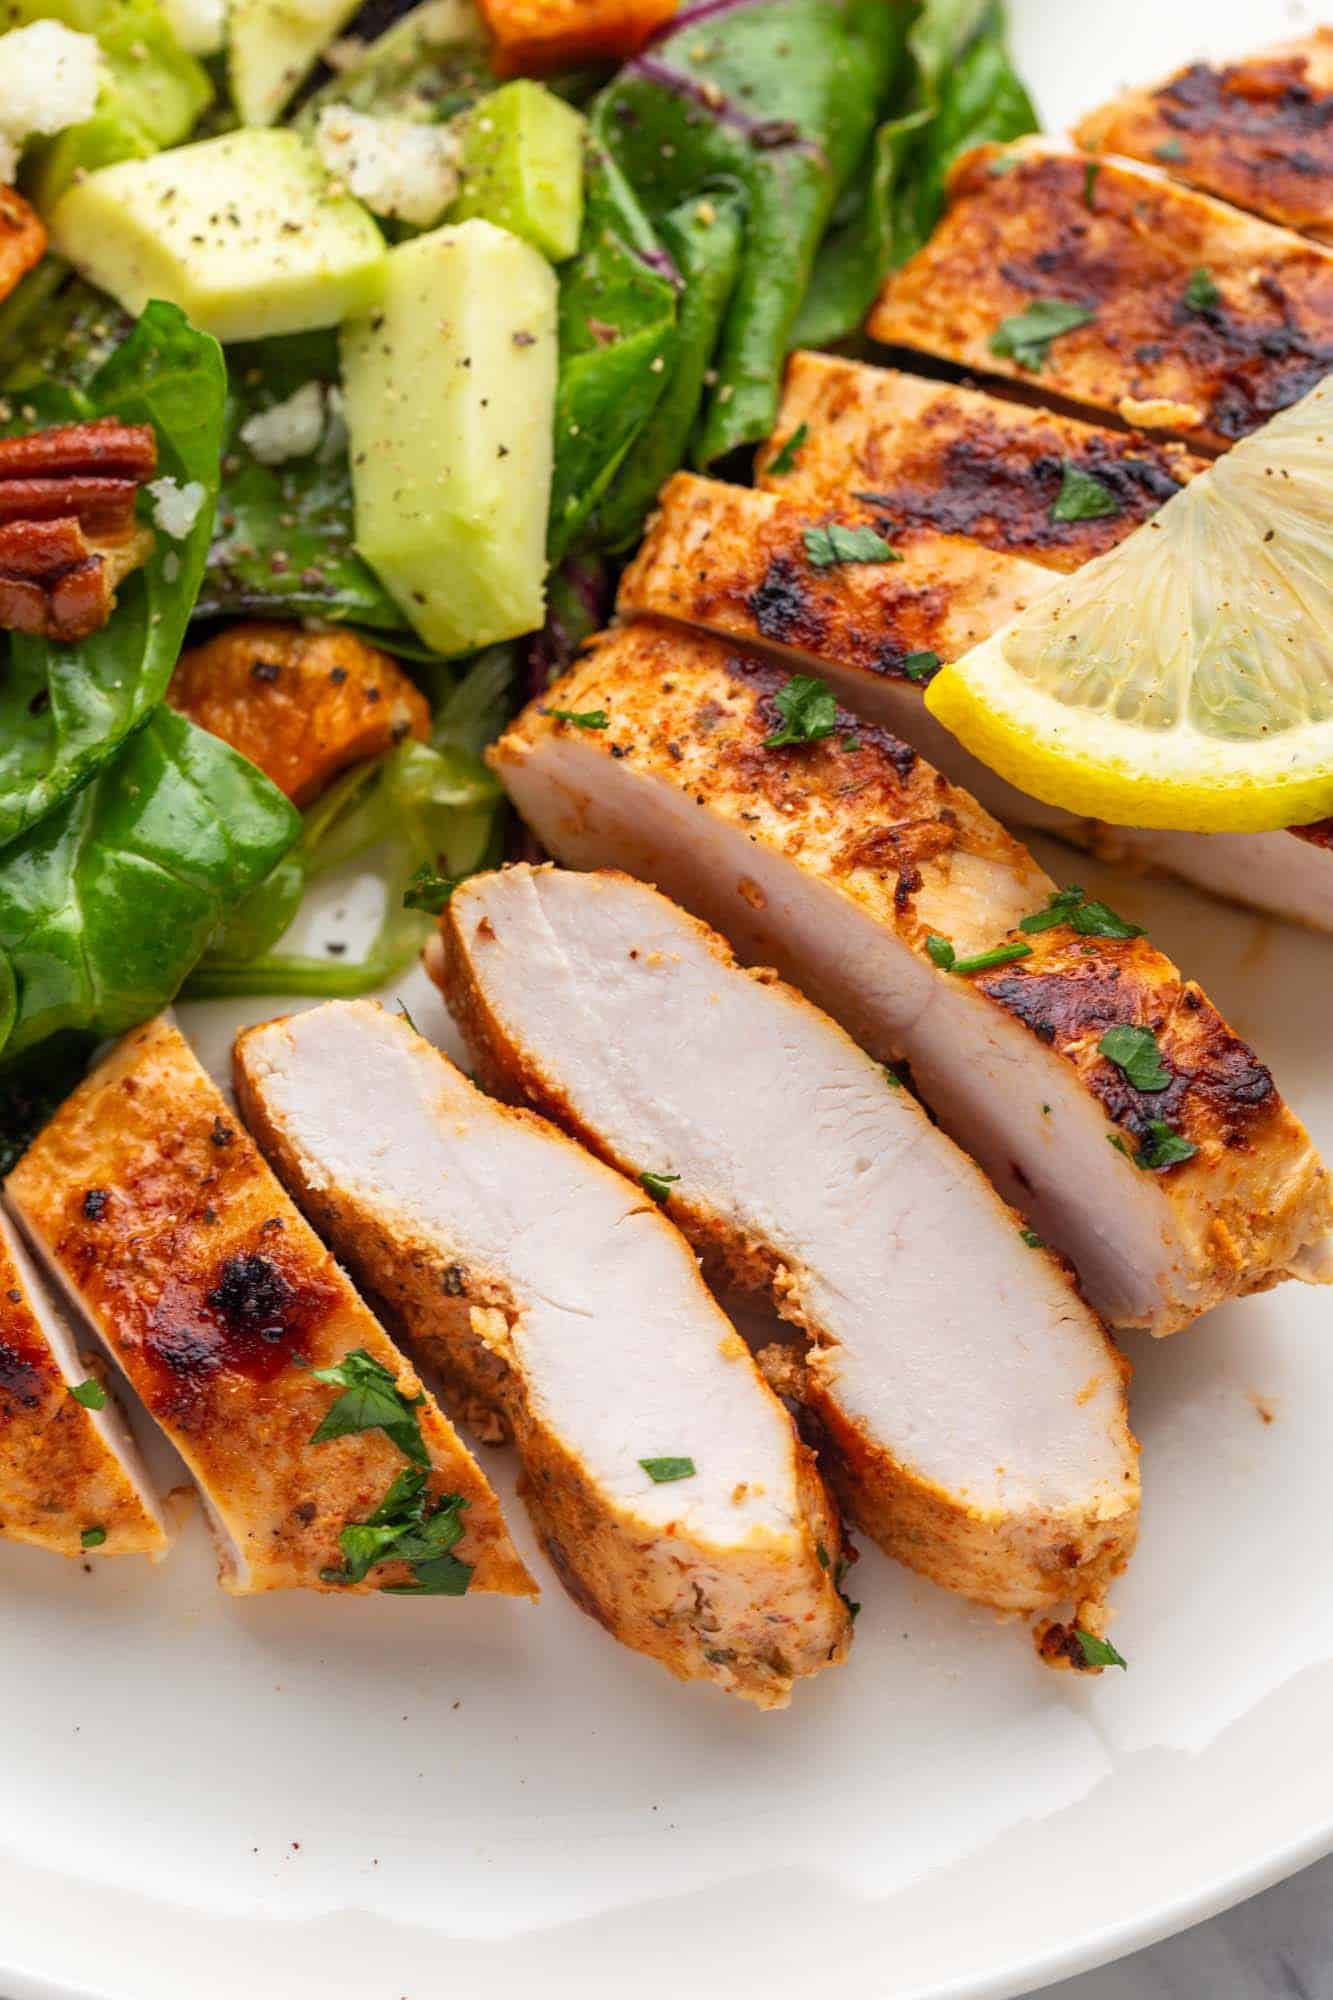 Sliced grilled chicken breast served with salad on a white plate